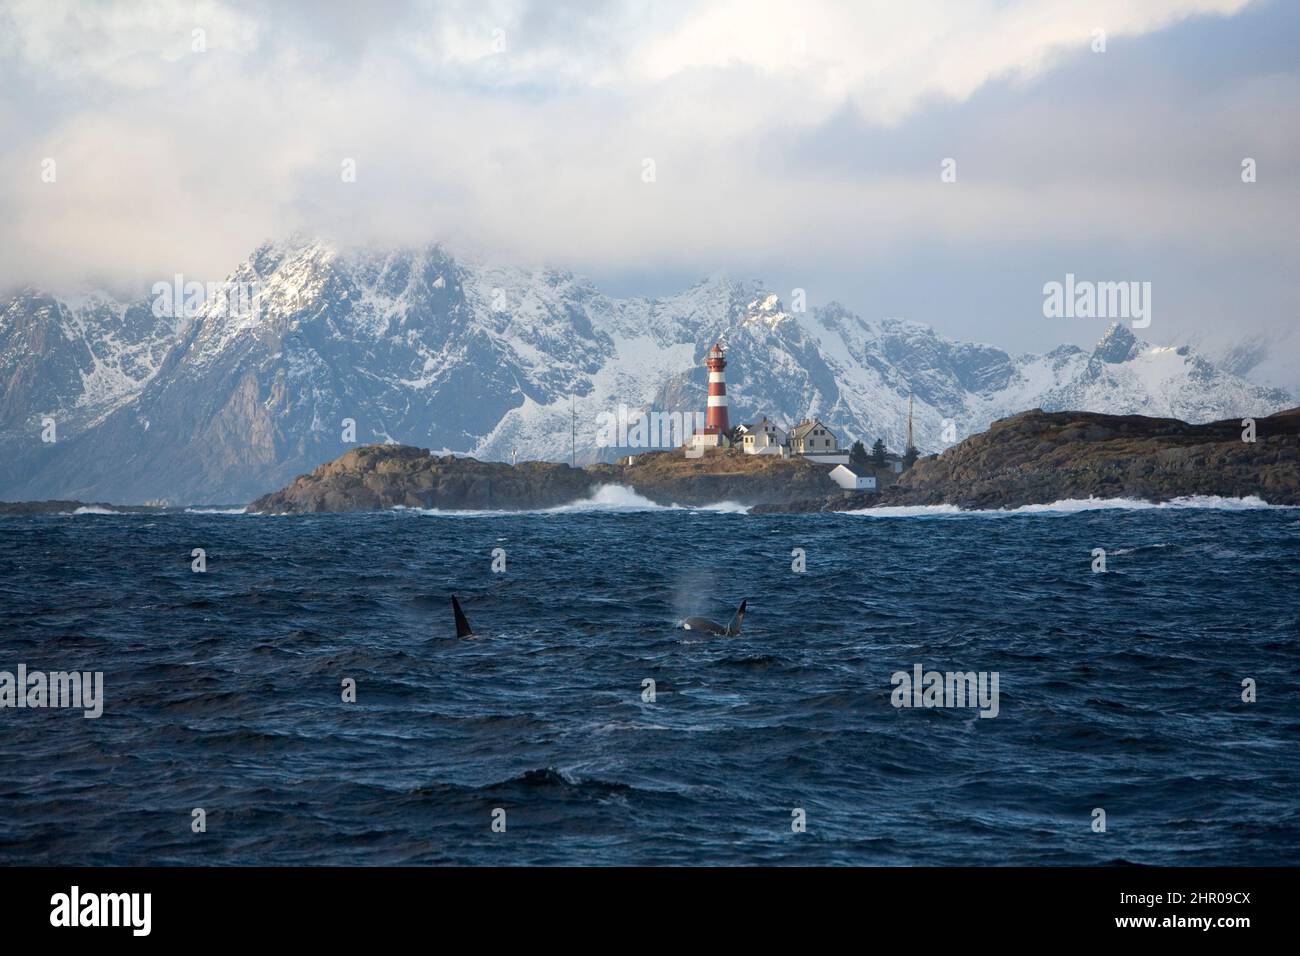 lighthouse on the island of Skrova, mountains and killer whale, Orcinus orca, Vestfjord, Ofotfjord, and Tysfjord, Lofoten Islands, Norway, Atlantic Oc Stock Photo